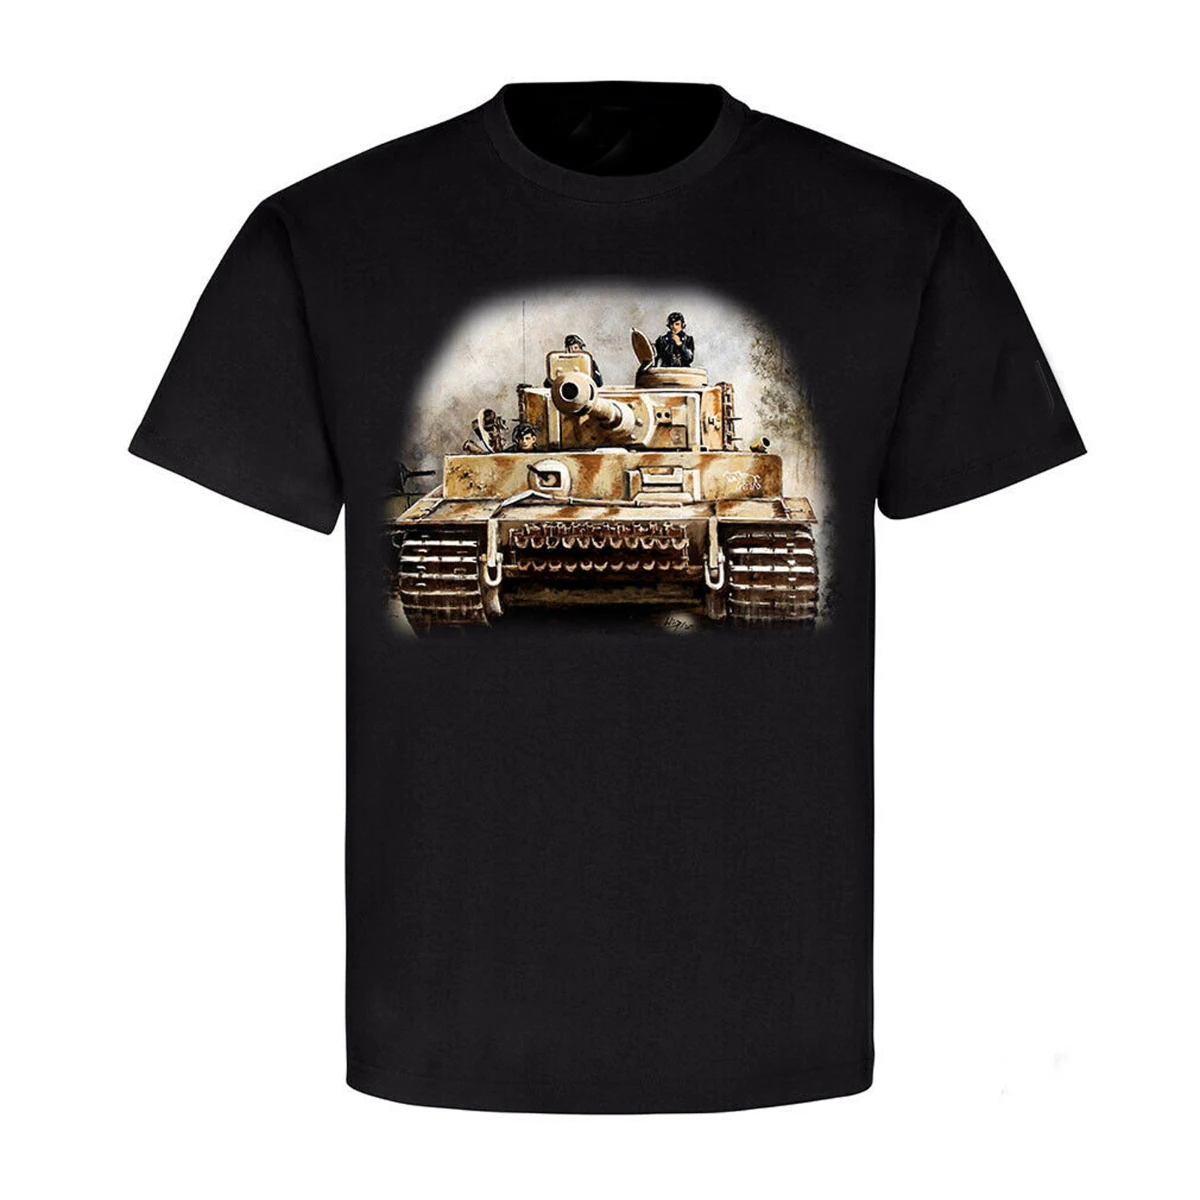 

Panzer Armored Troops Tiger Carius Tank Painting Art T-Shirt. Summer Cotton Short Sleeve O-Neck Mens T Shirt New S-3XL